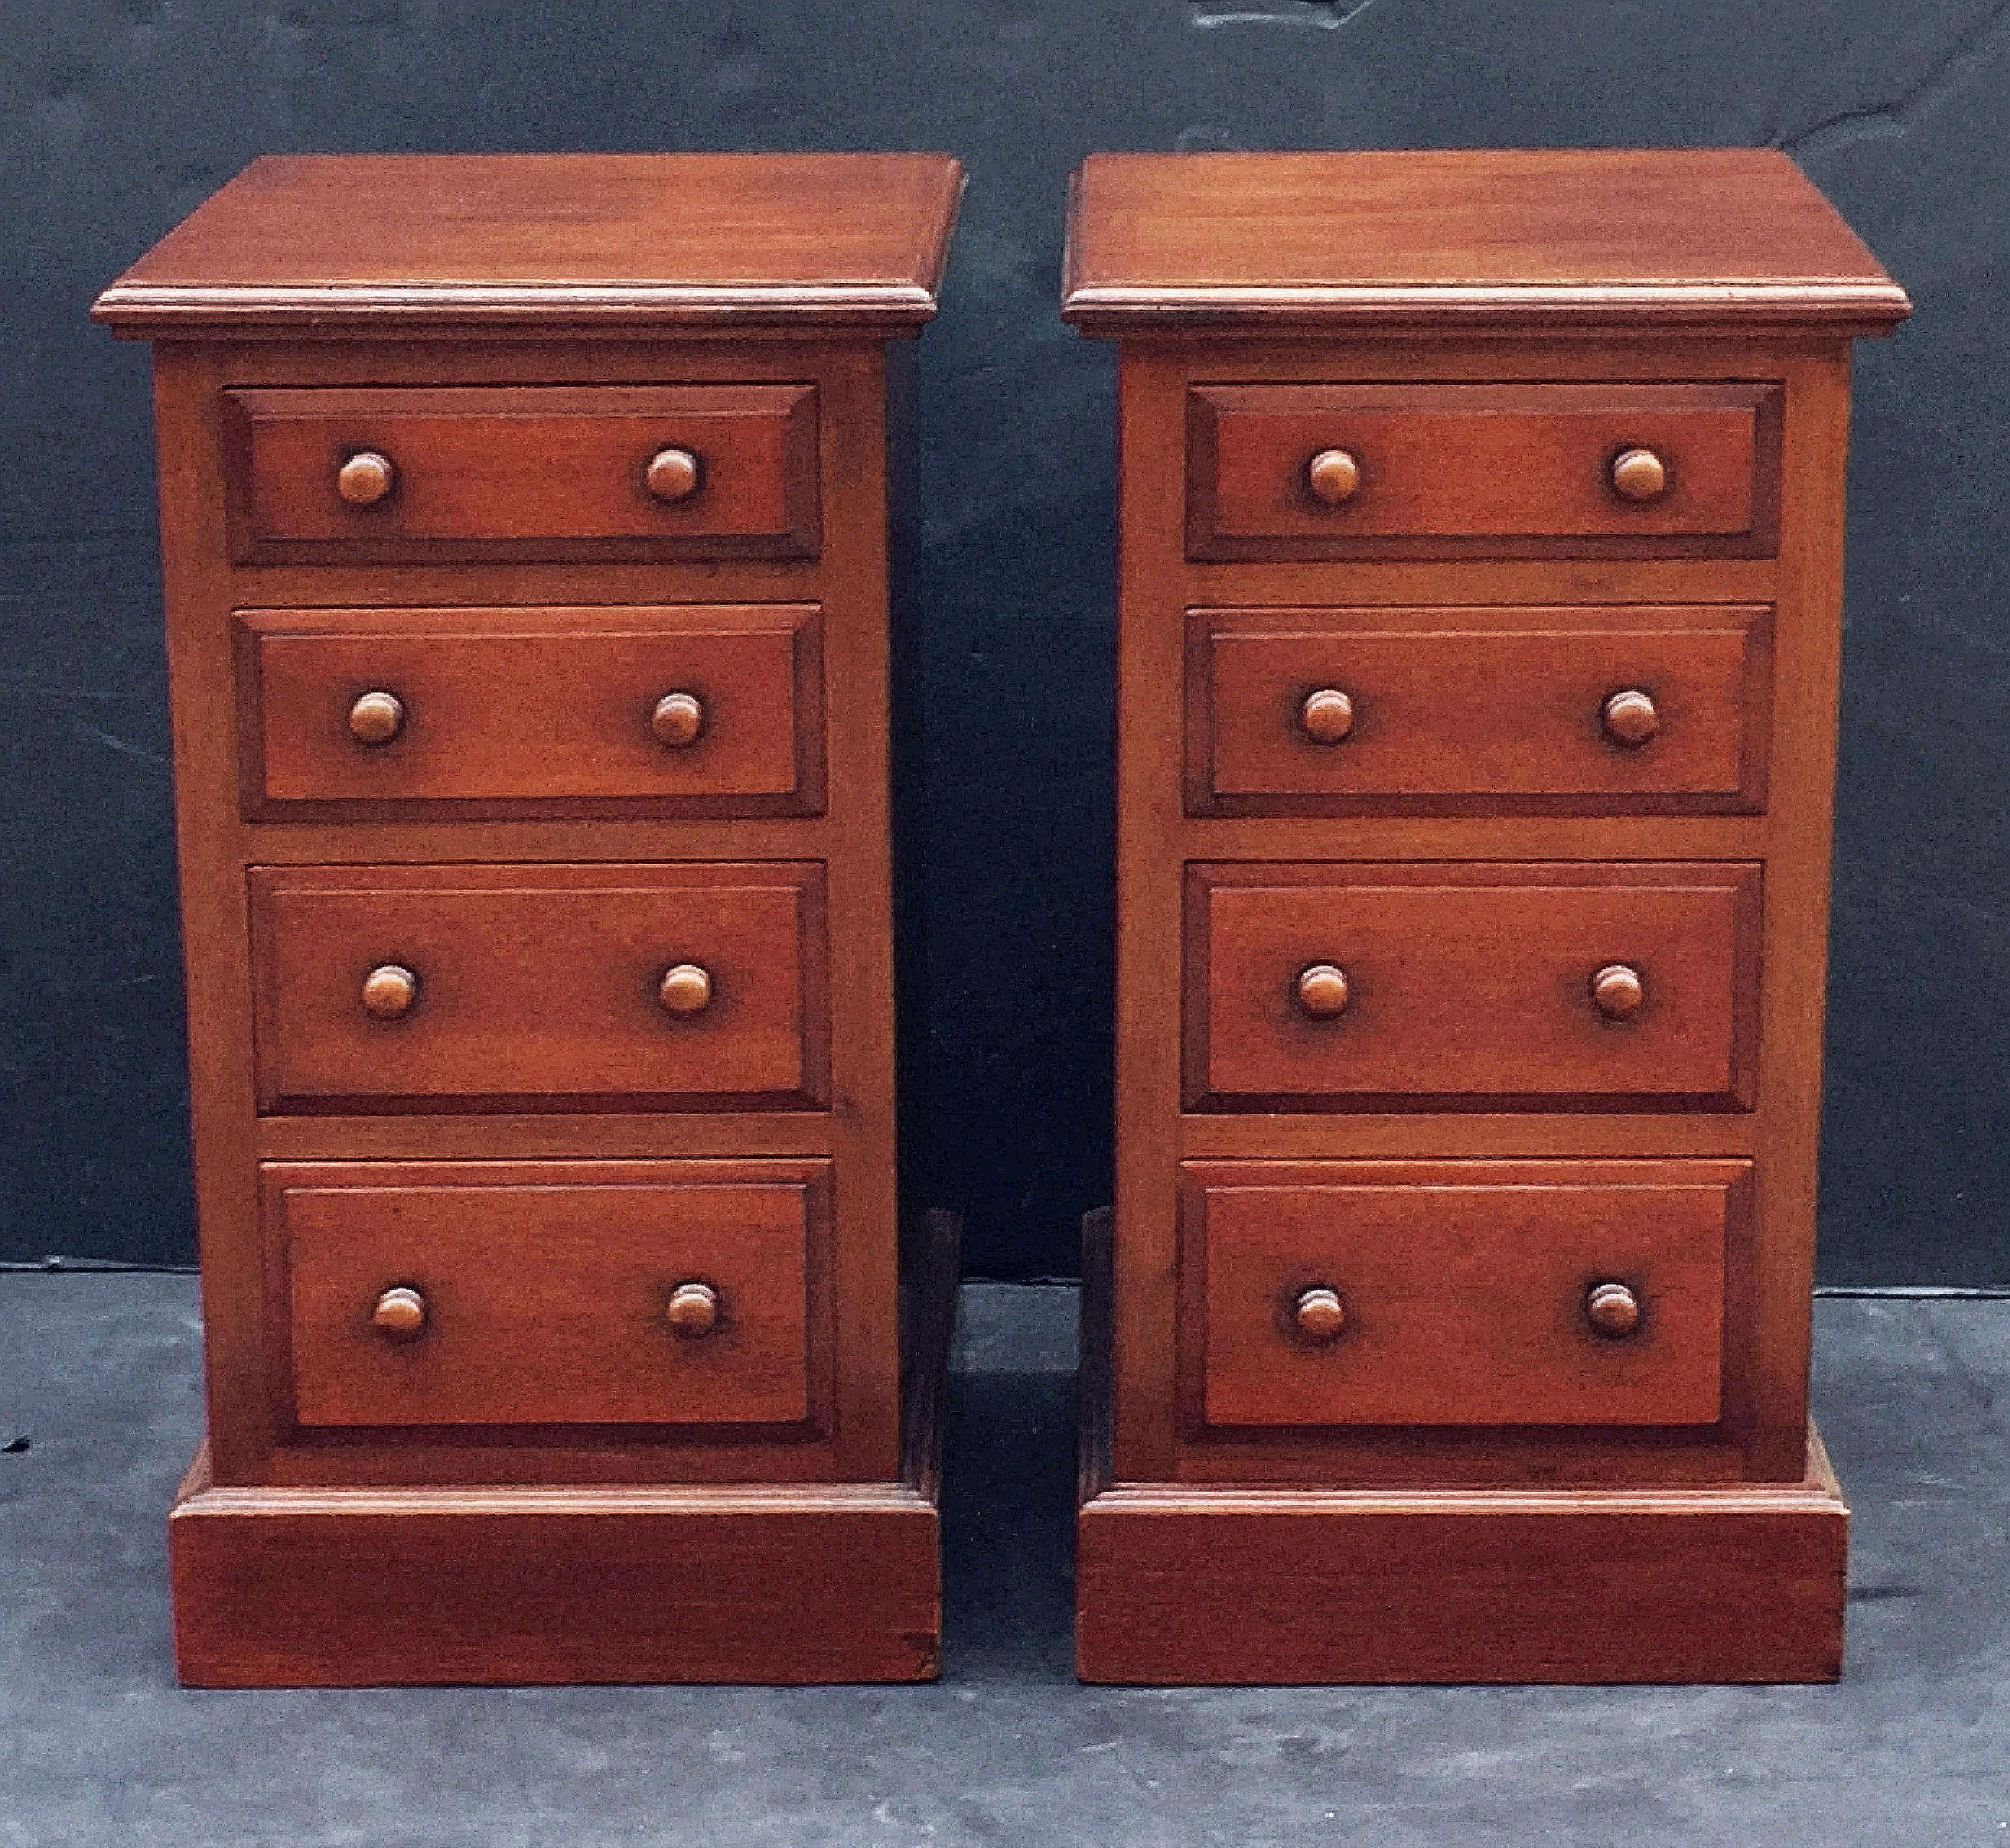 A handsome pair of English bedside chests or cabinet night stands of mahogany each chest with a molded top over a frieze of four drawers of ascending size (top to bottom), each drawer with wood knobs, and set upon a plinth base.

Priced as a pair